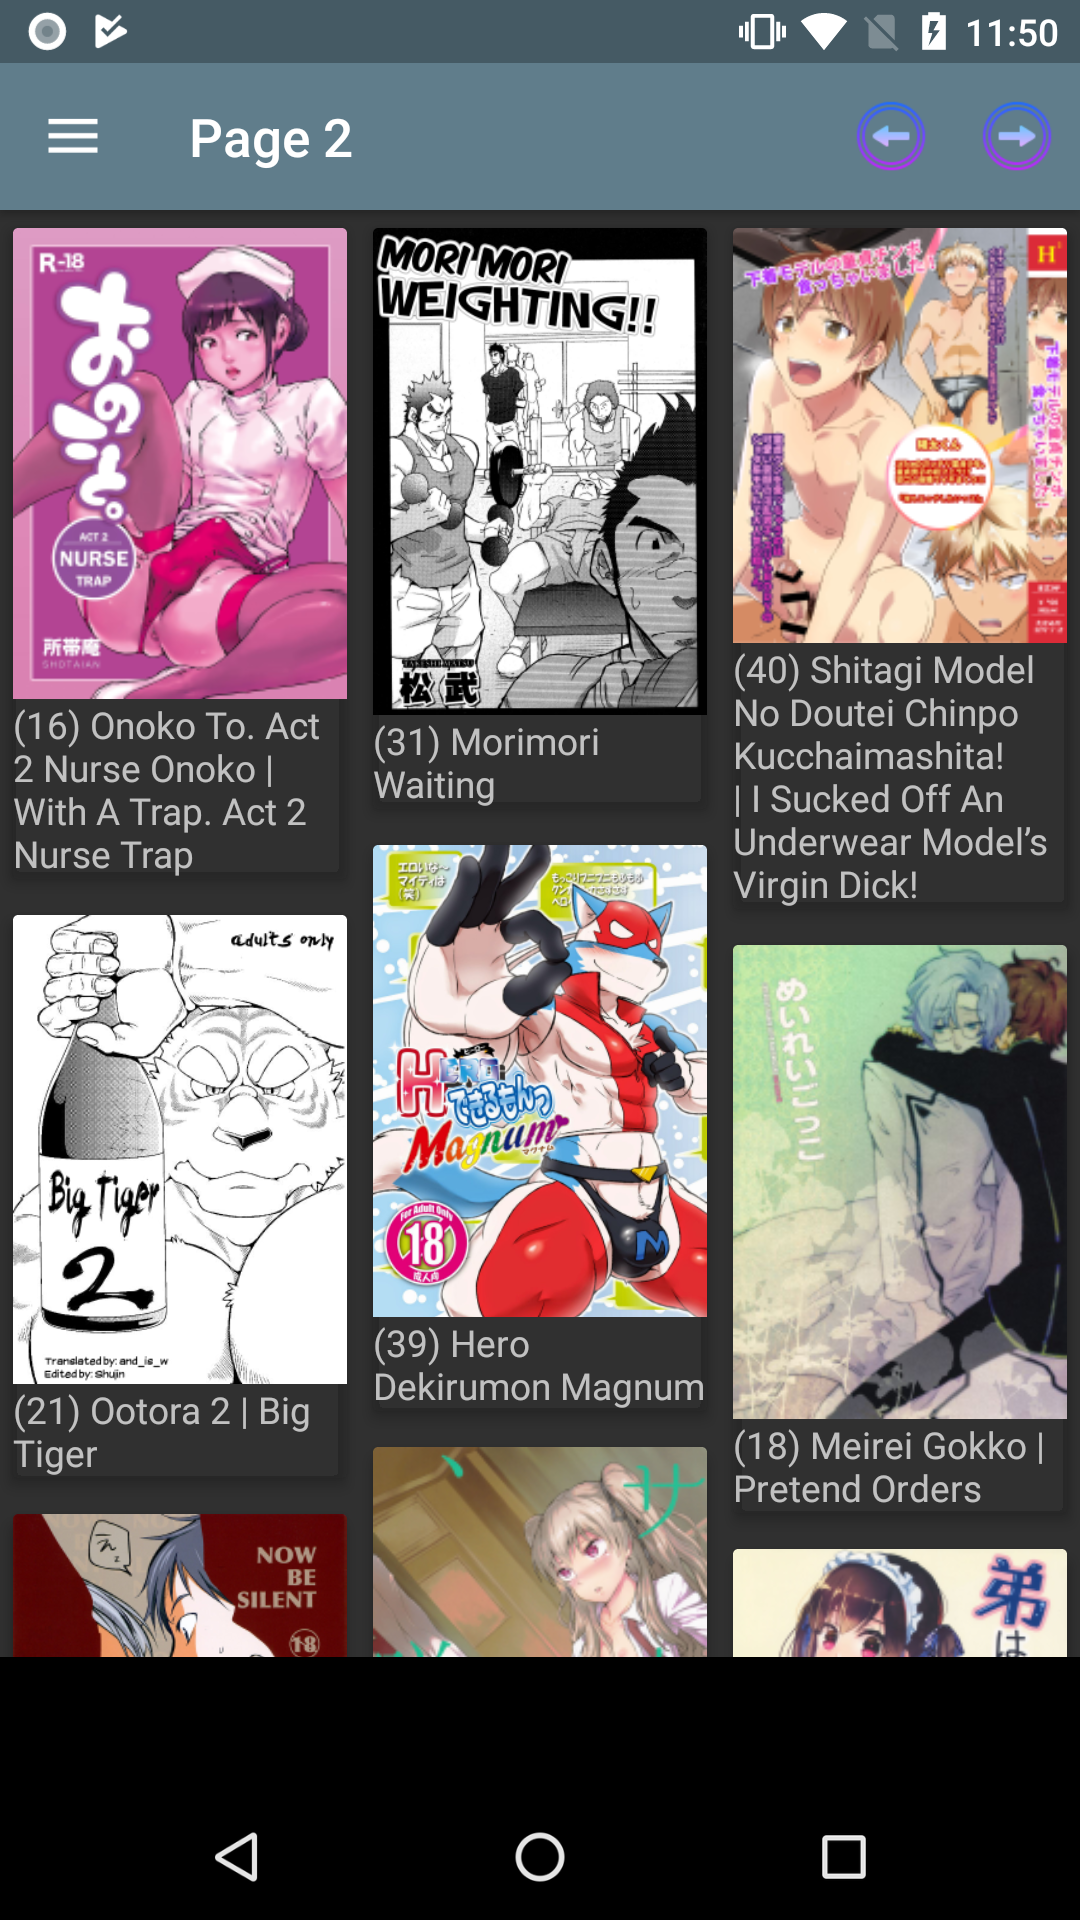 Yaoi Collections andriod,hentai,apk,anime,app,henti,yaoi,porn,edit,download,phone,apps,wallpaper,gay,adult,galleries,hentia,photo,comics